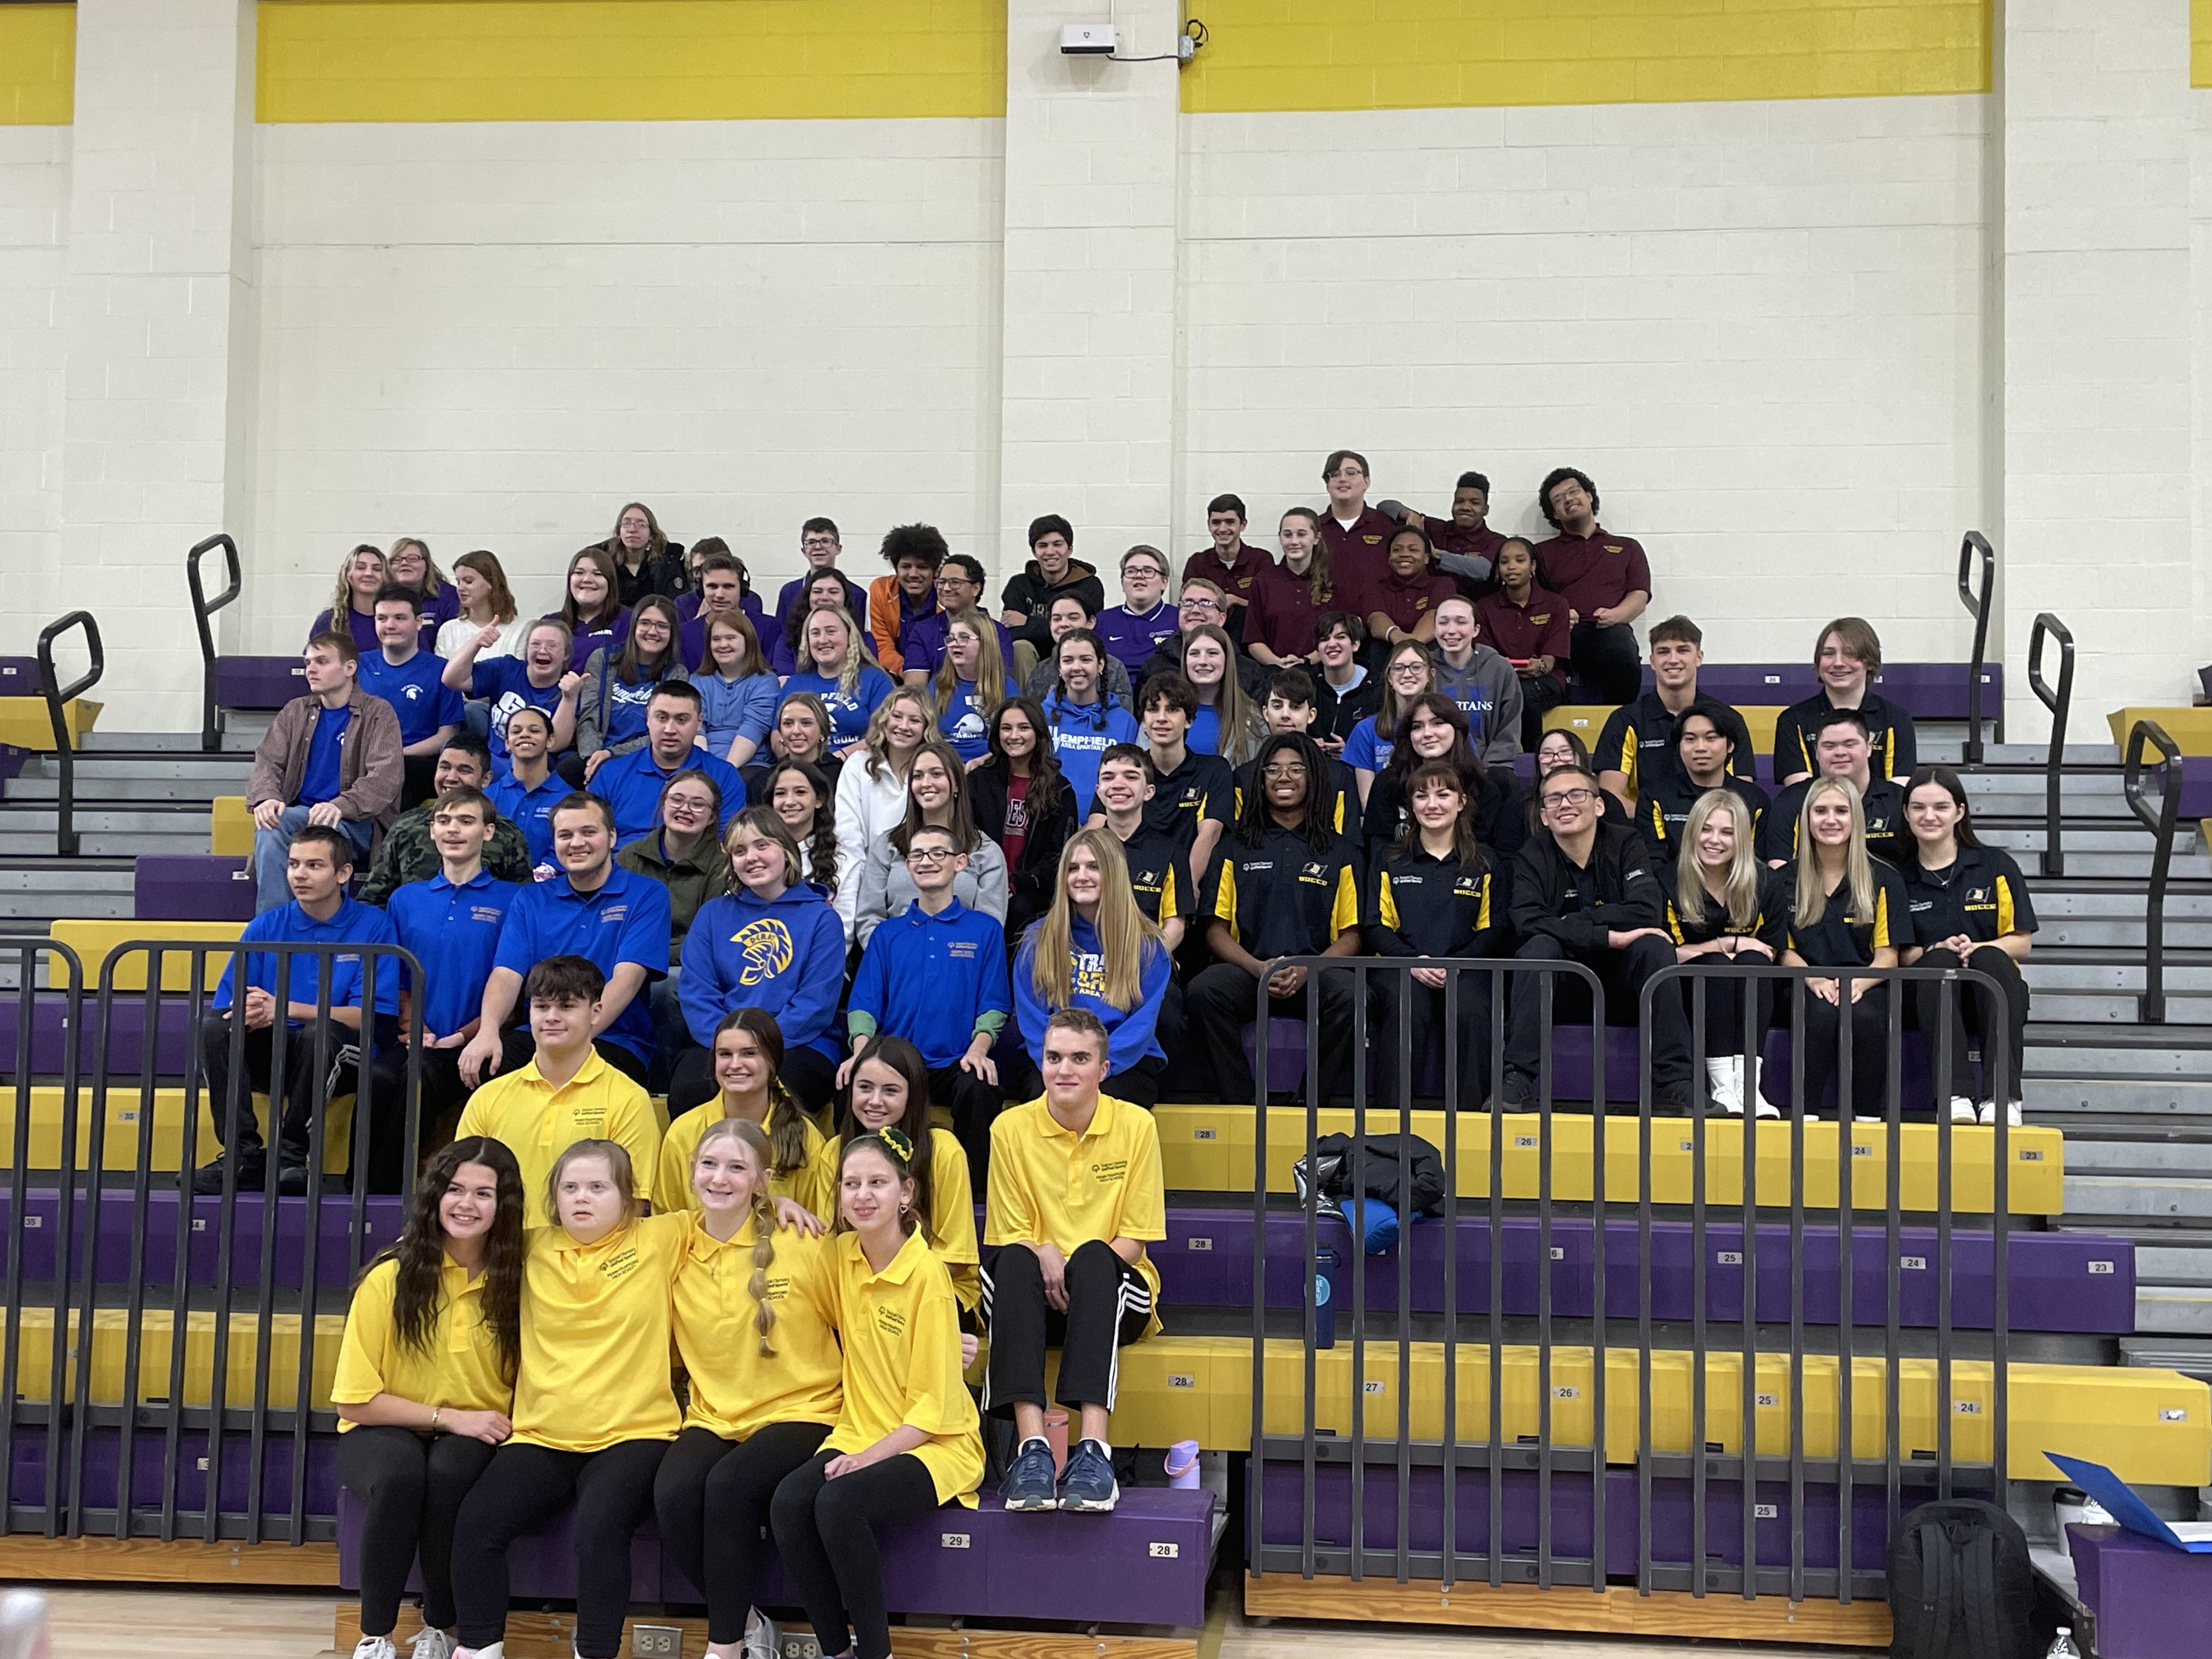 The Penn-Trafford Unified Bocce team (in yellow) joined students from 6 other schools for their first competition